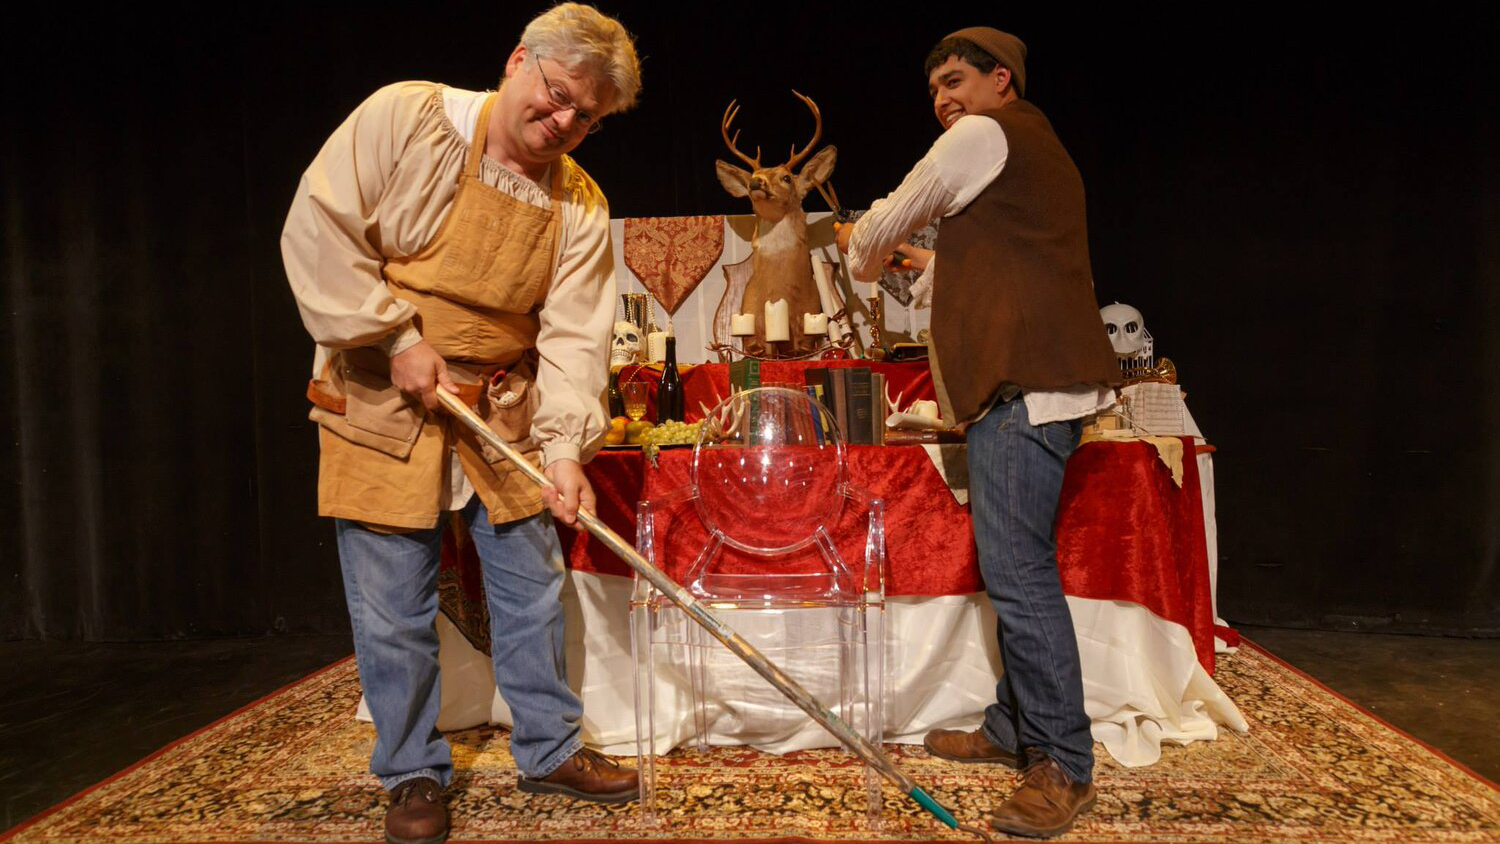 Actors playing gravediggers in Richard II standing in front of a table and clear plastic chair. One is holding a gardening tool.